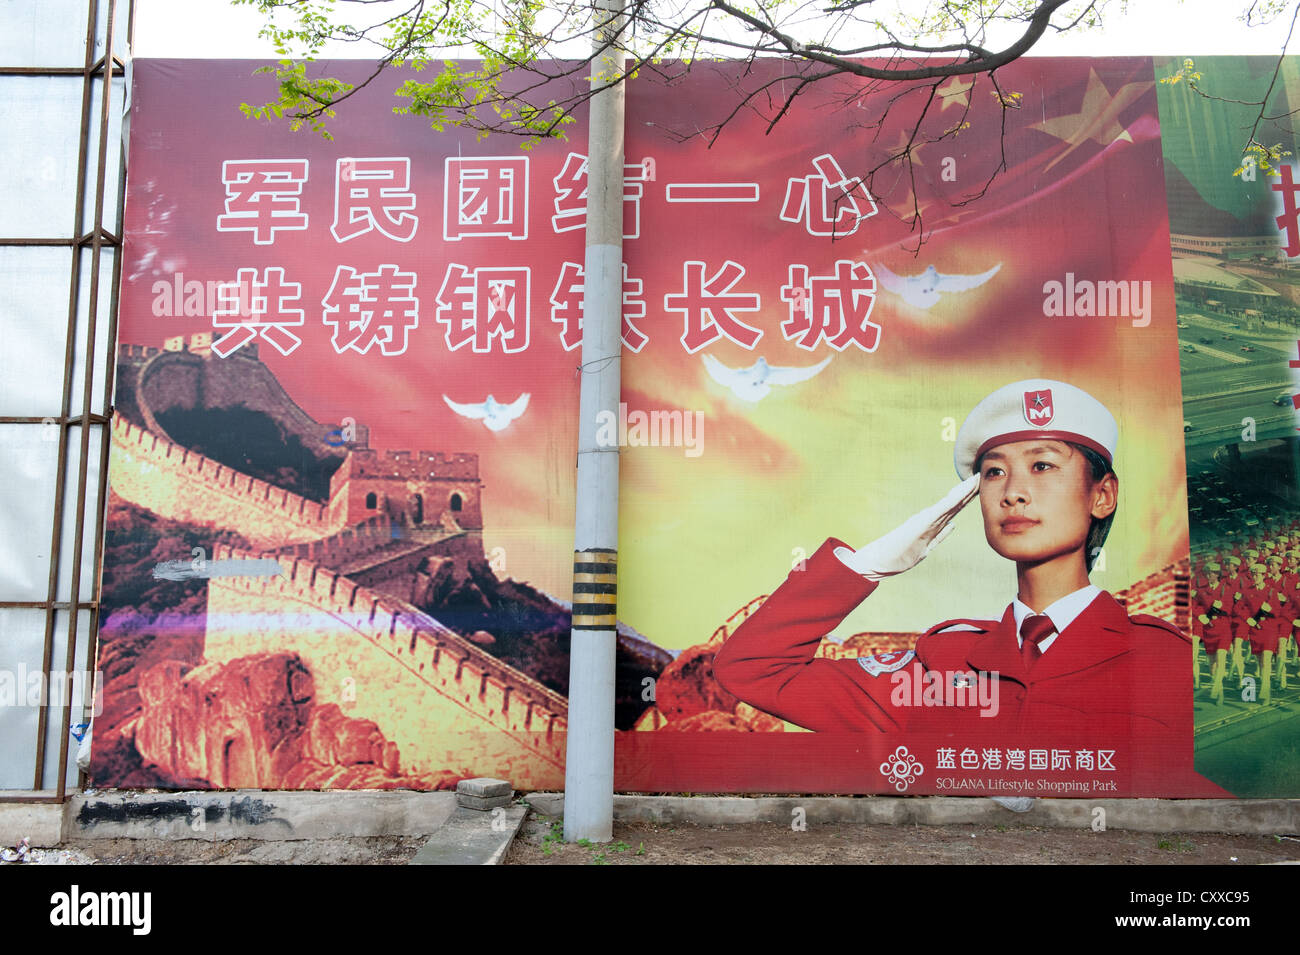 Beijing. Billboard with propaganda for the People's Liberation Army. Stock Photo